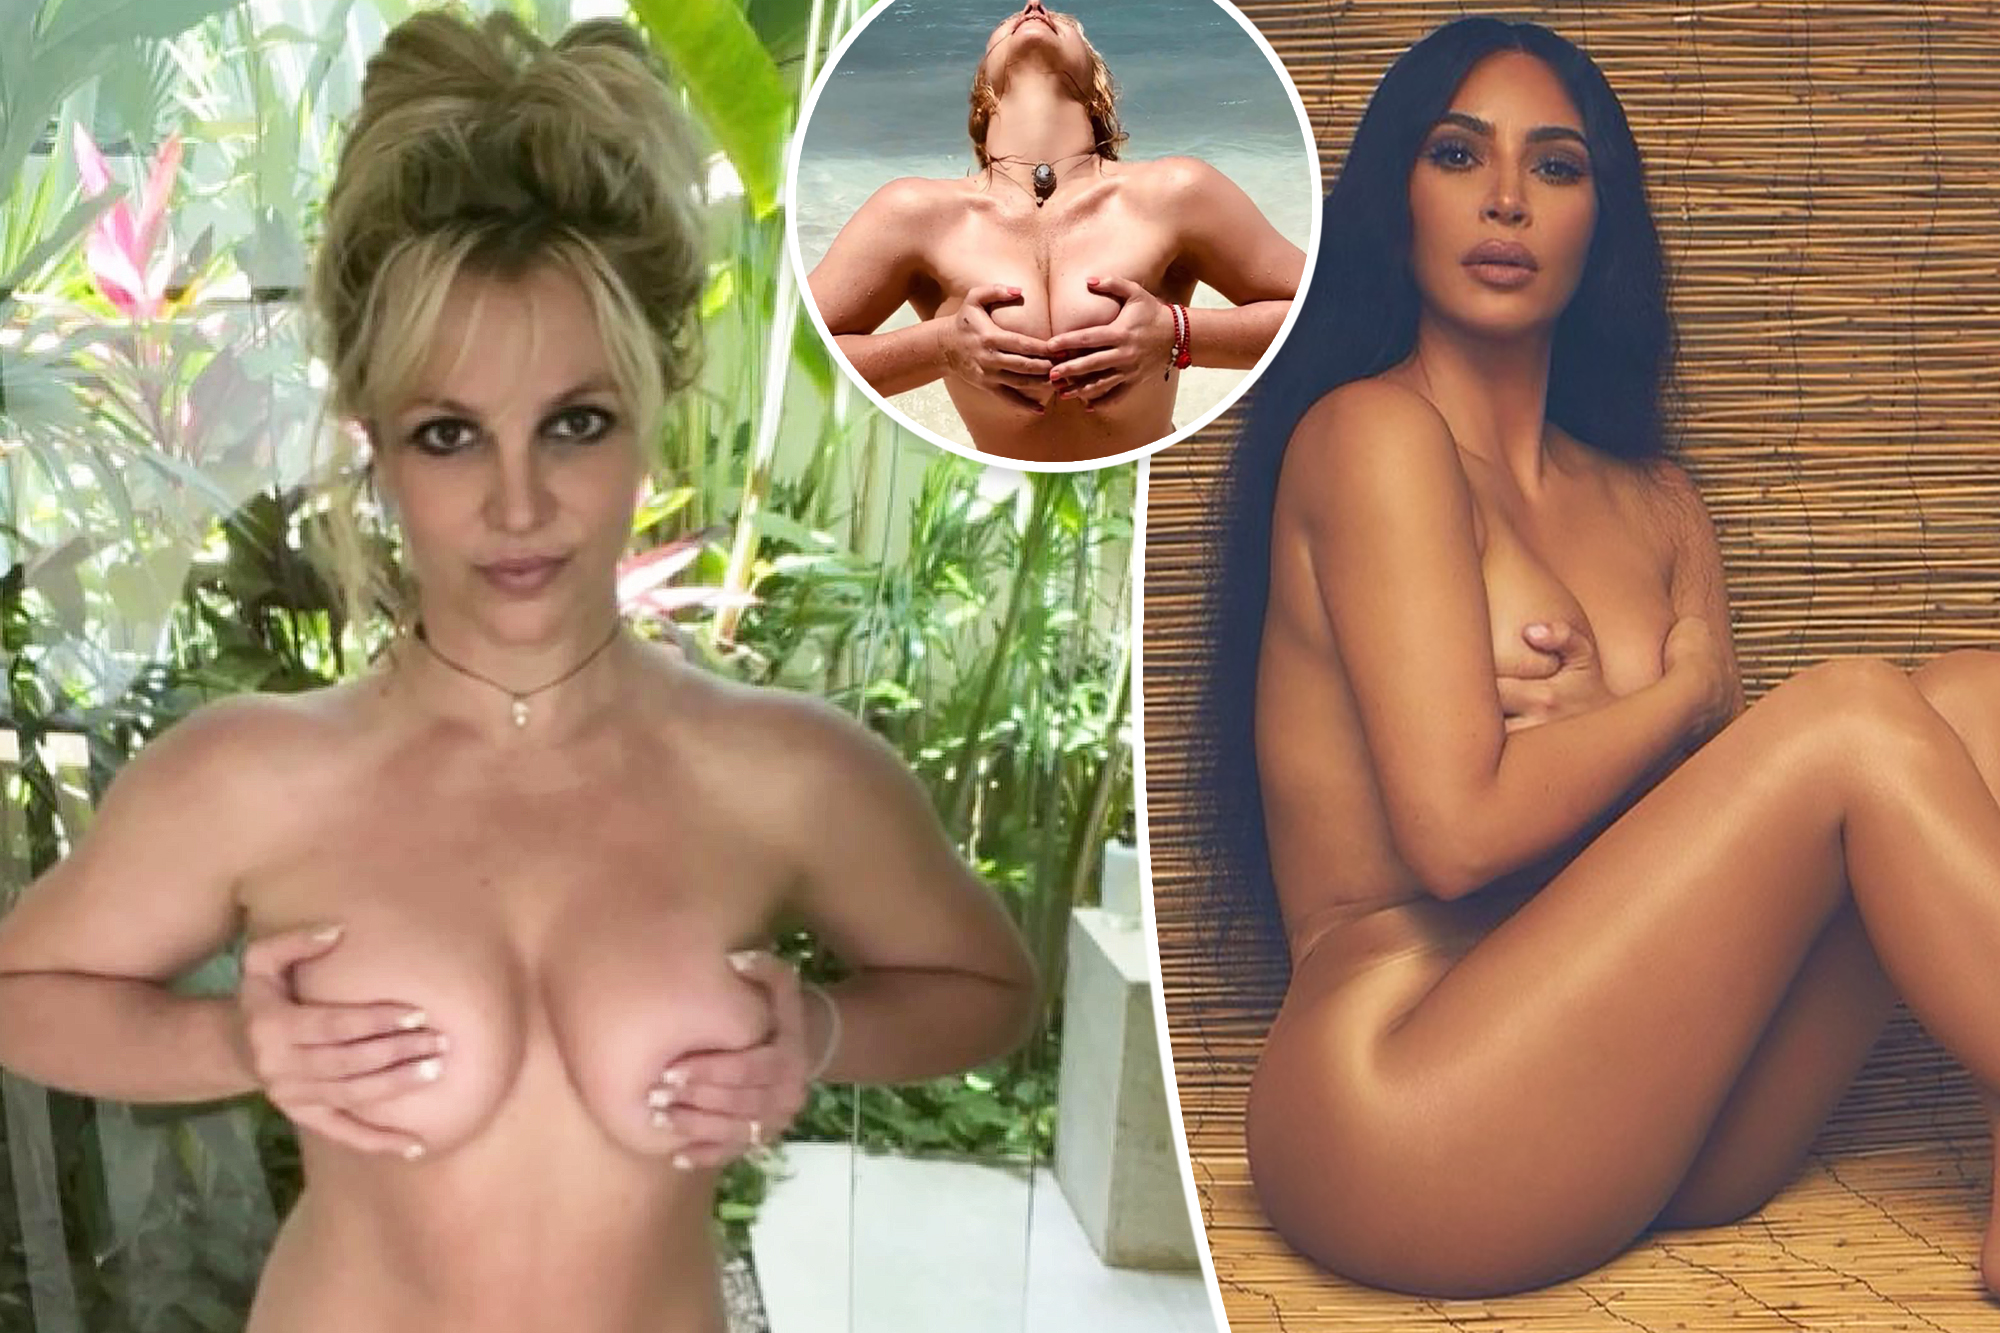 achmad ramdhan recommends kardashian nude gallery pic